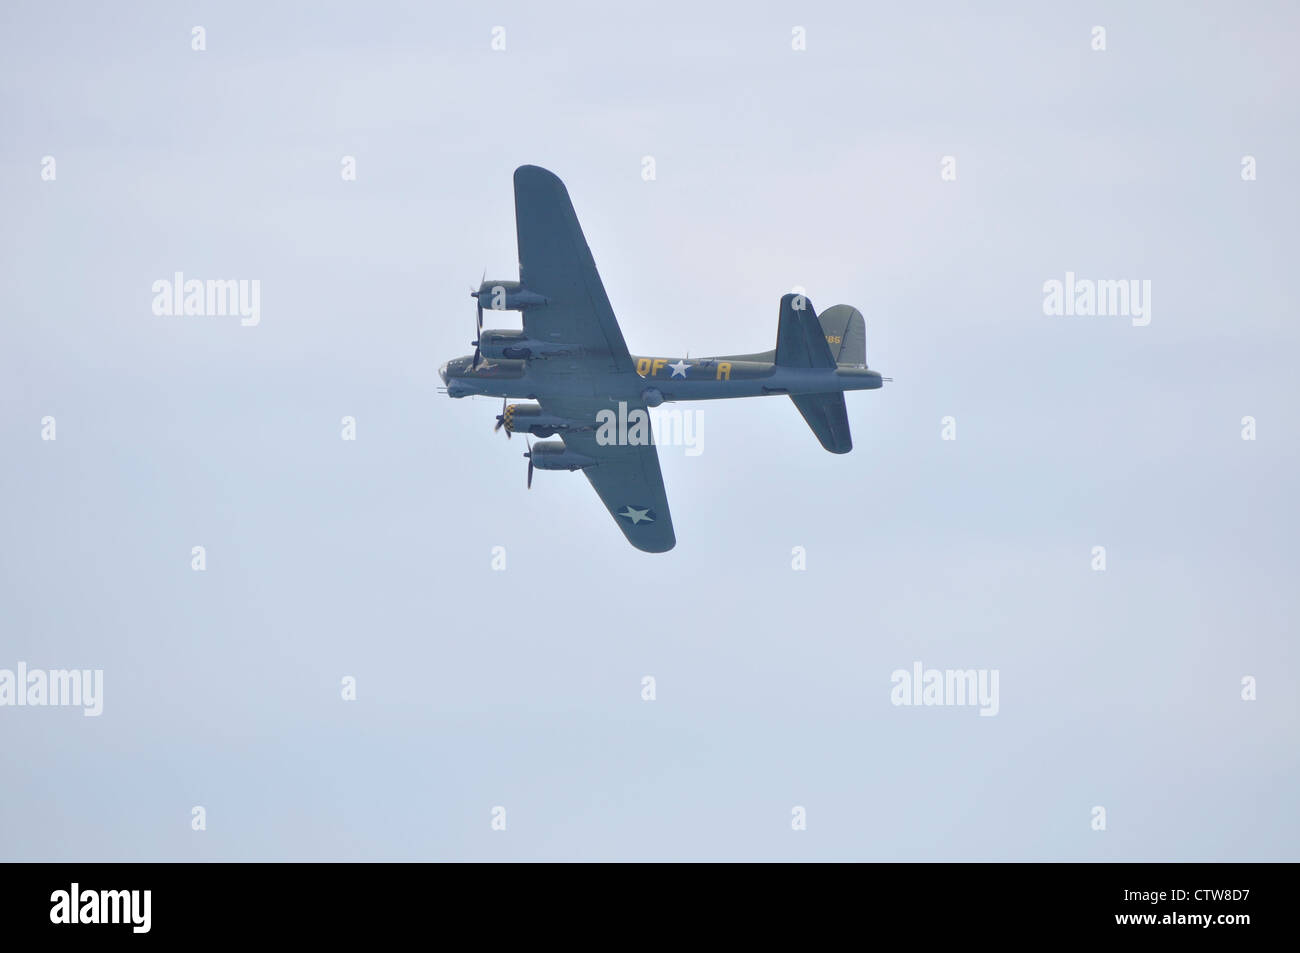 Boeing B-17G Flying Fortress 'Memphis Belle' (G-BEDF) USAAF daylight bomber performs at the Bournemouth Air Festival, 2011 Stock Photo